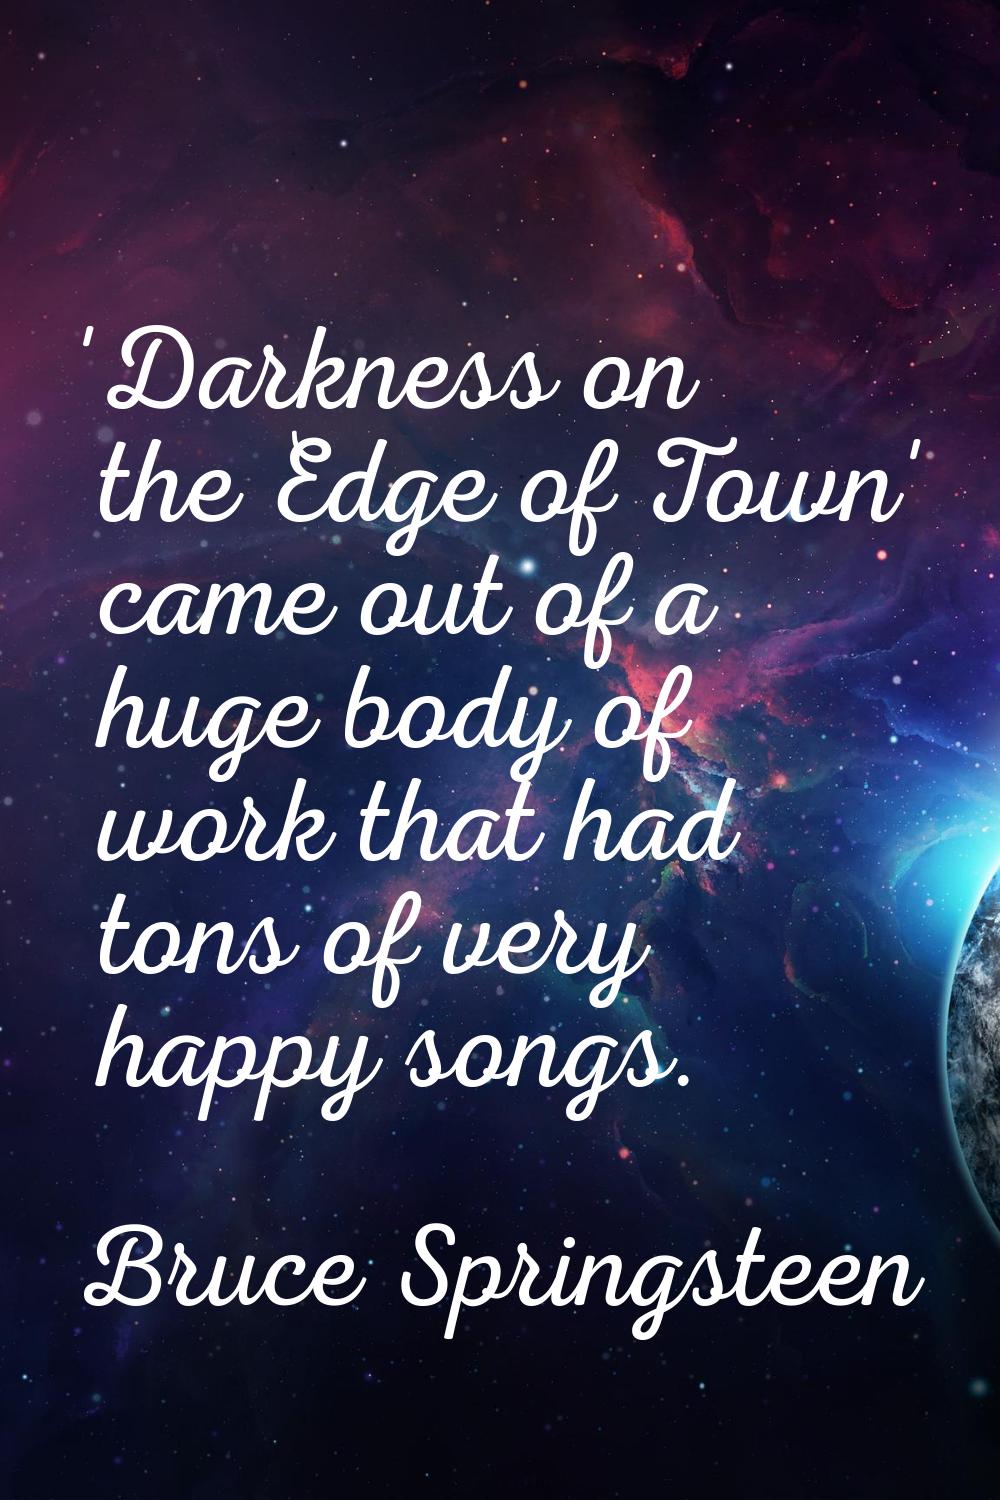 'Darkness on the Edge of Town' came out of a huge body of work that had tons of very happy songs.